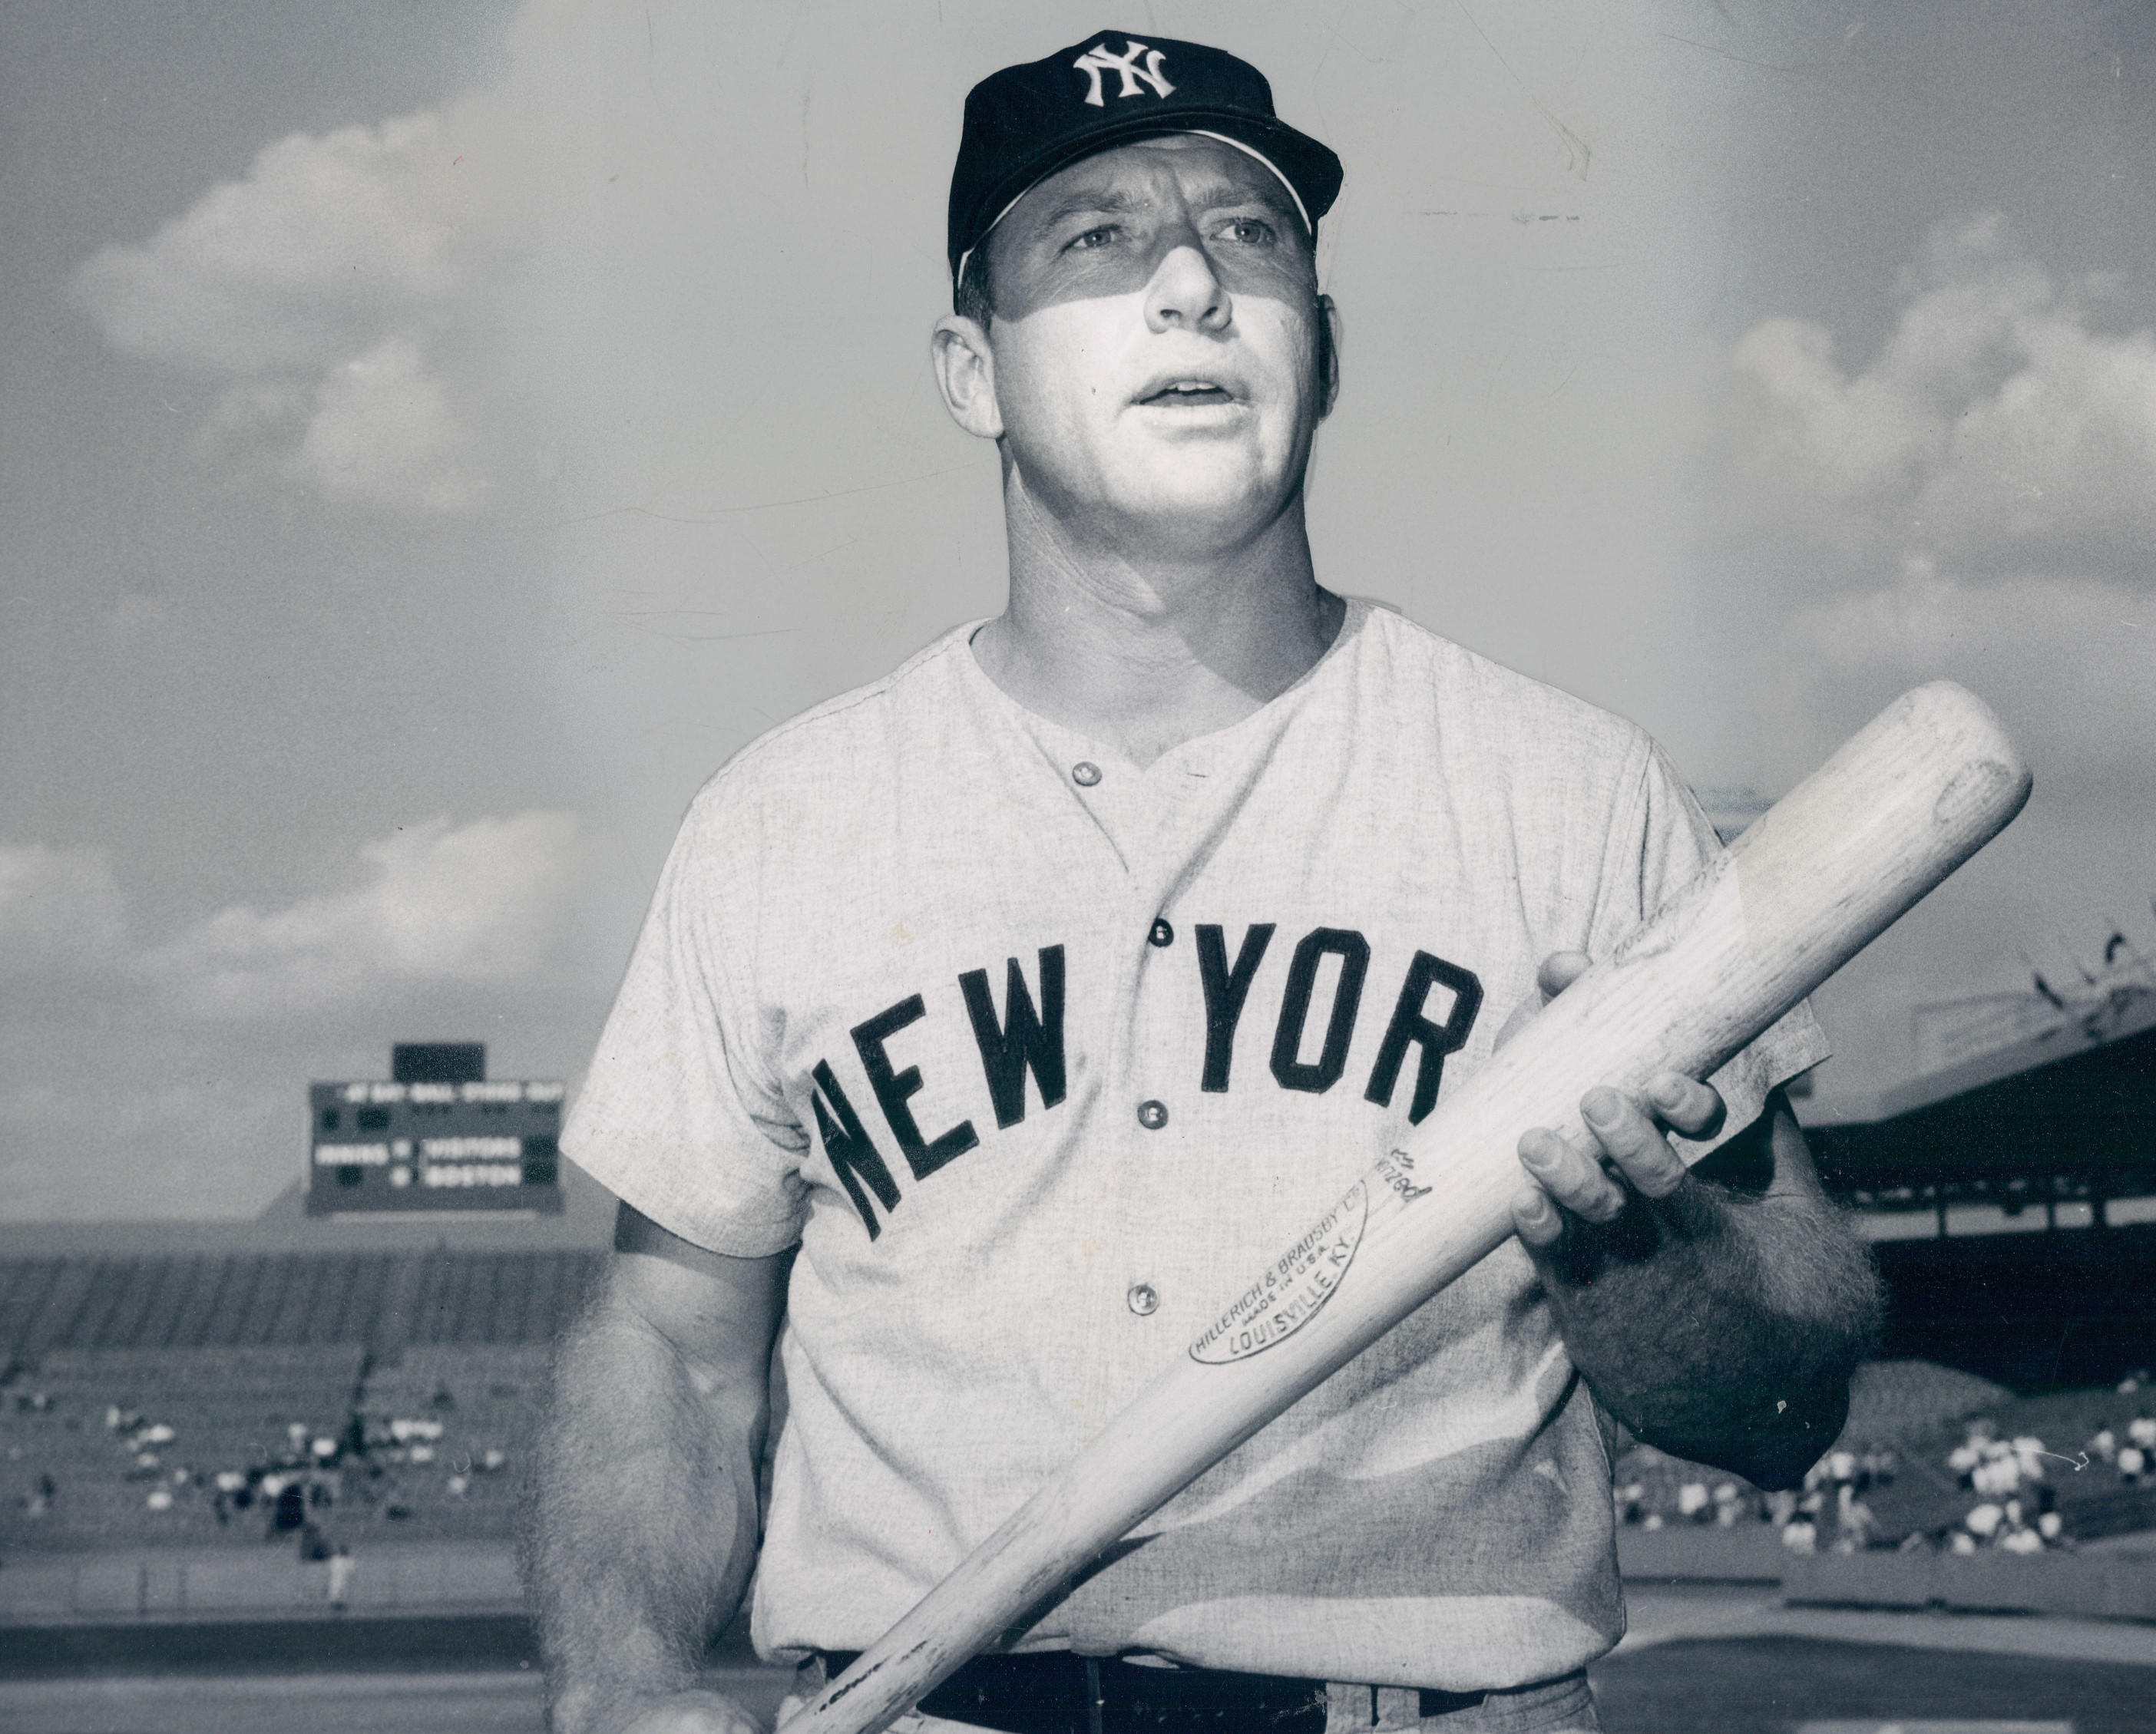 This game-worn Mickey Mantle jersey from 1958 shattered records